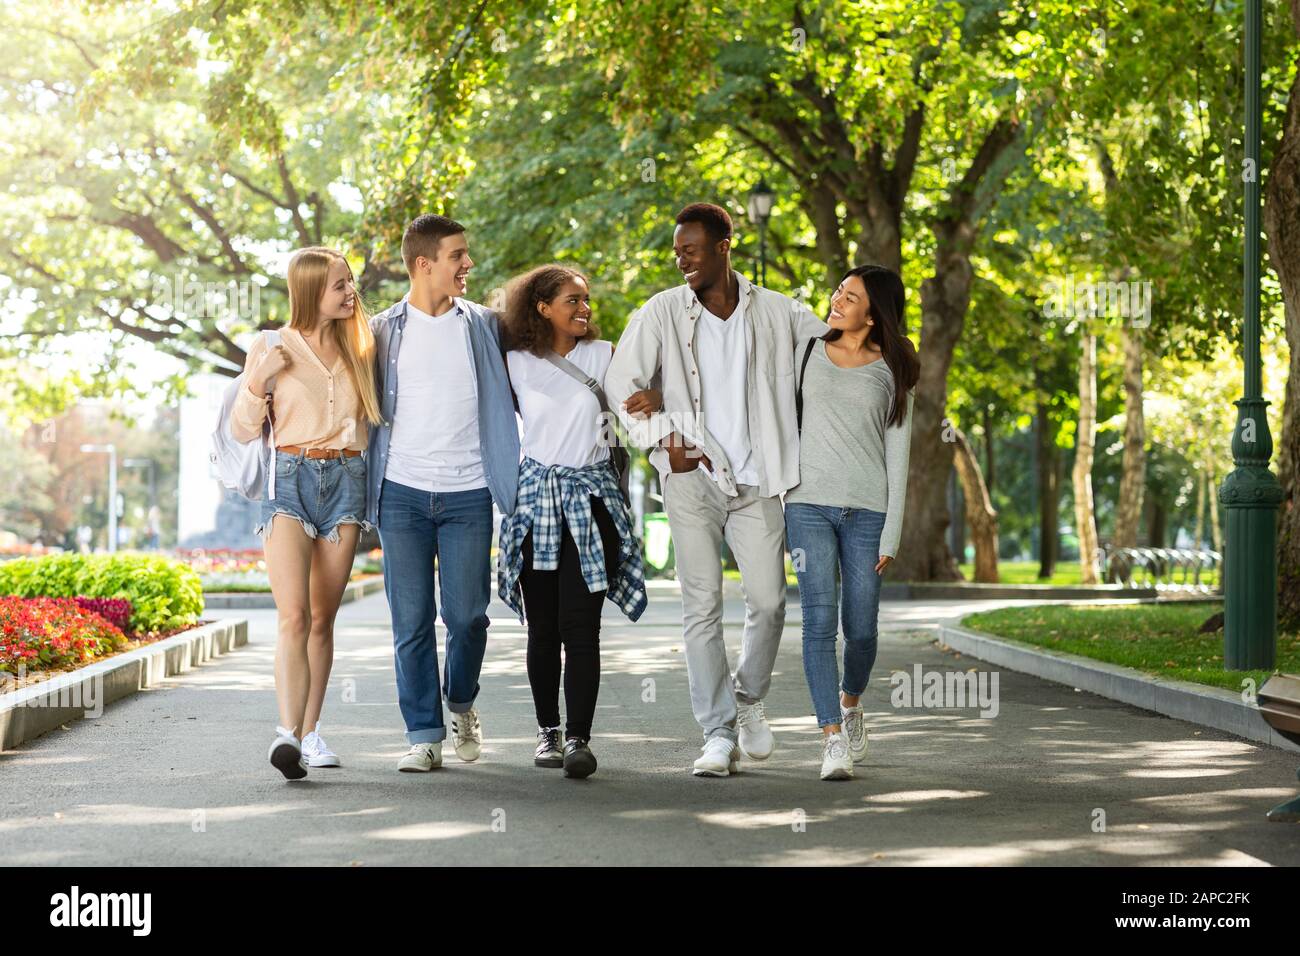 Happy students walking together in public park after studying Stock ...